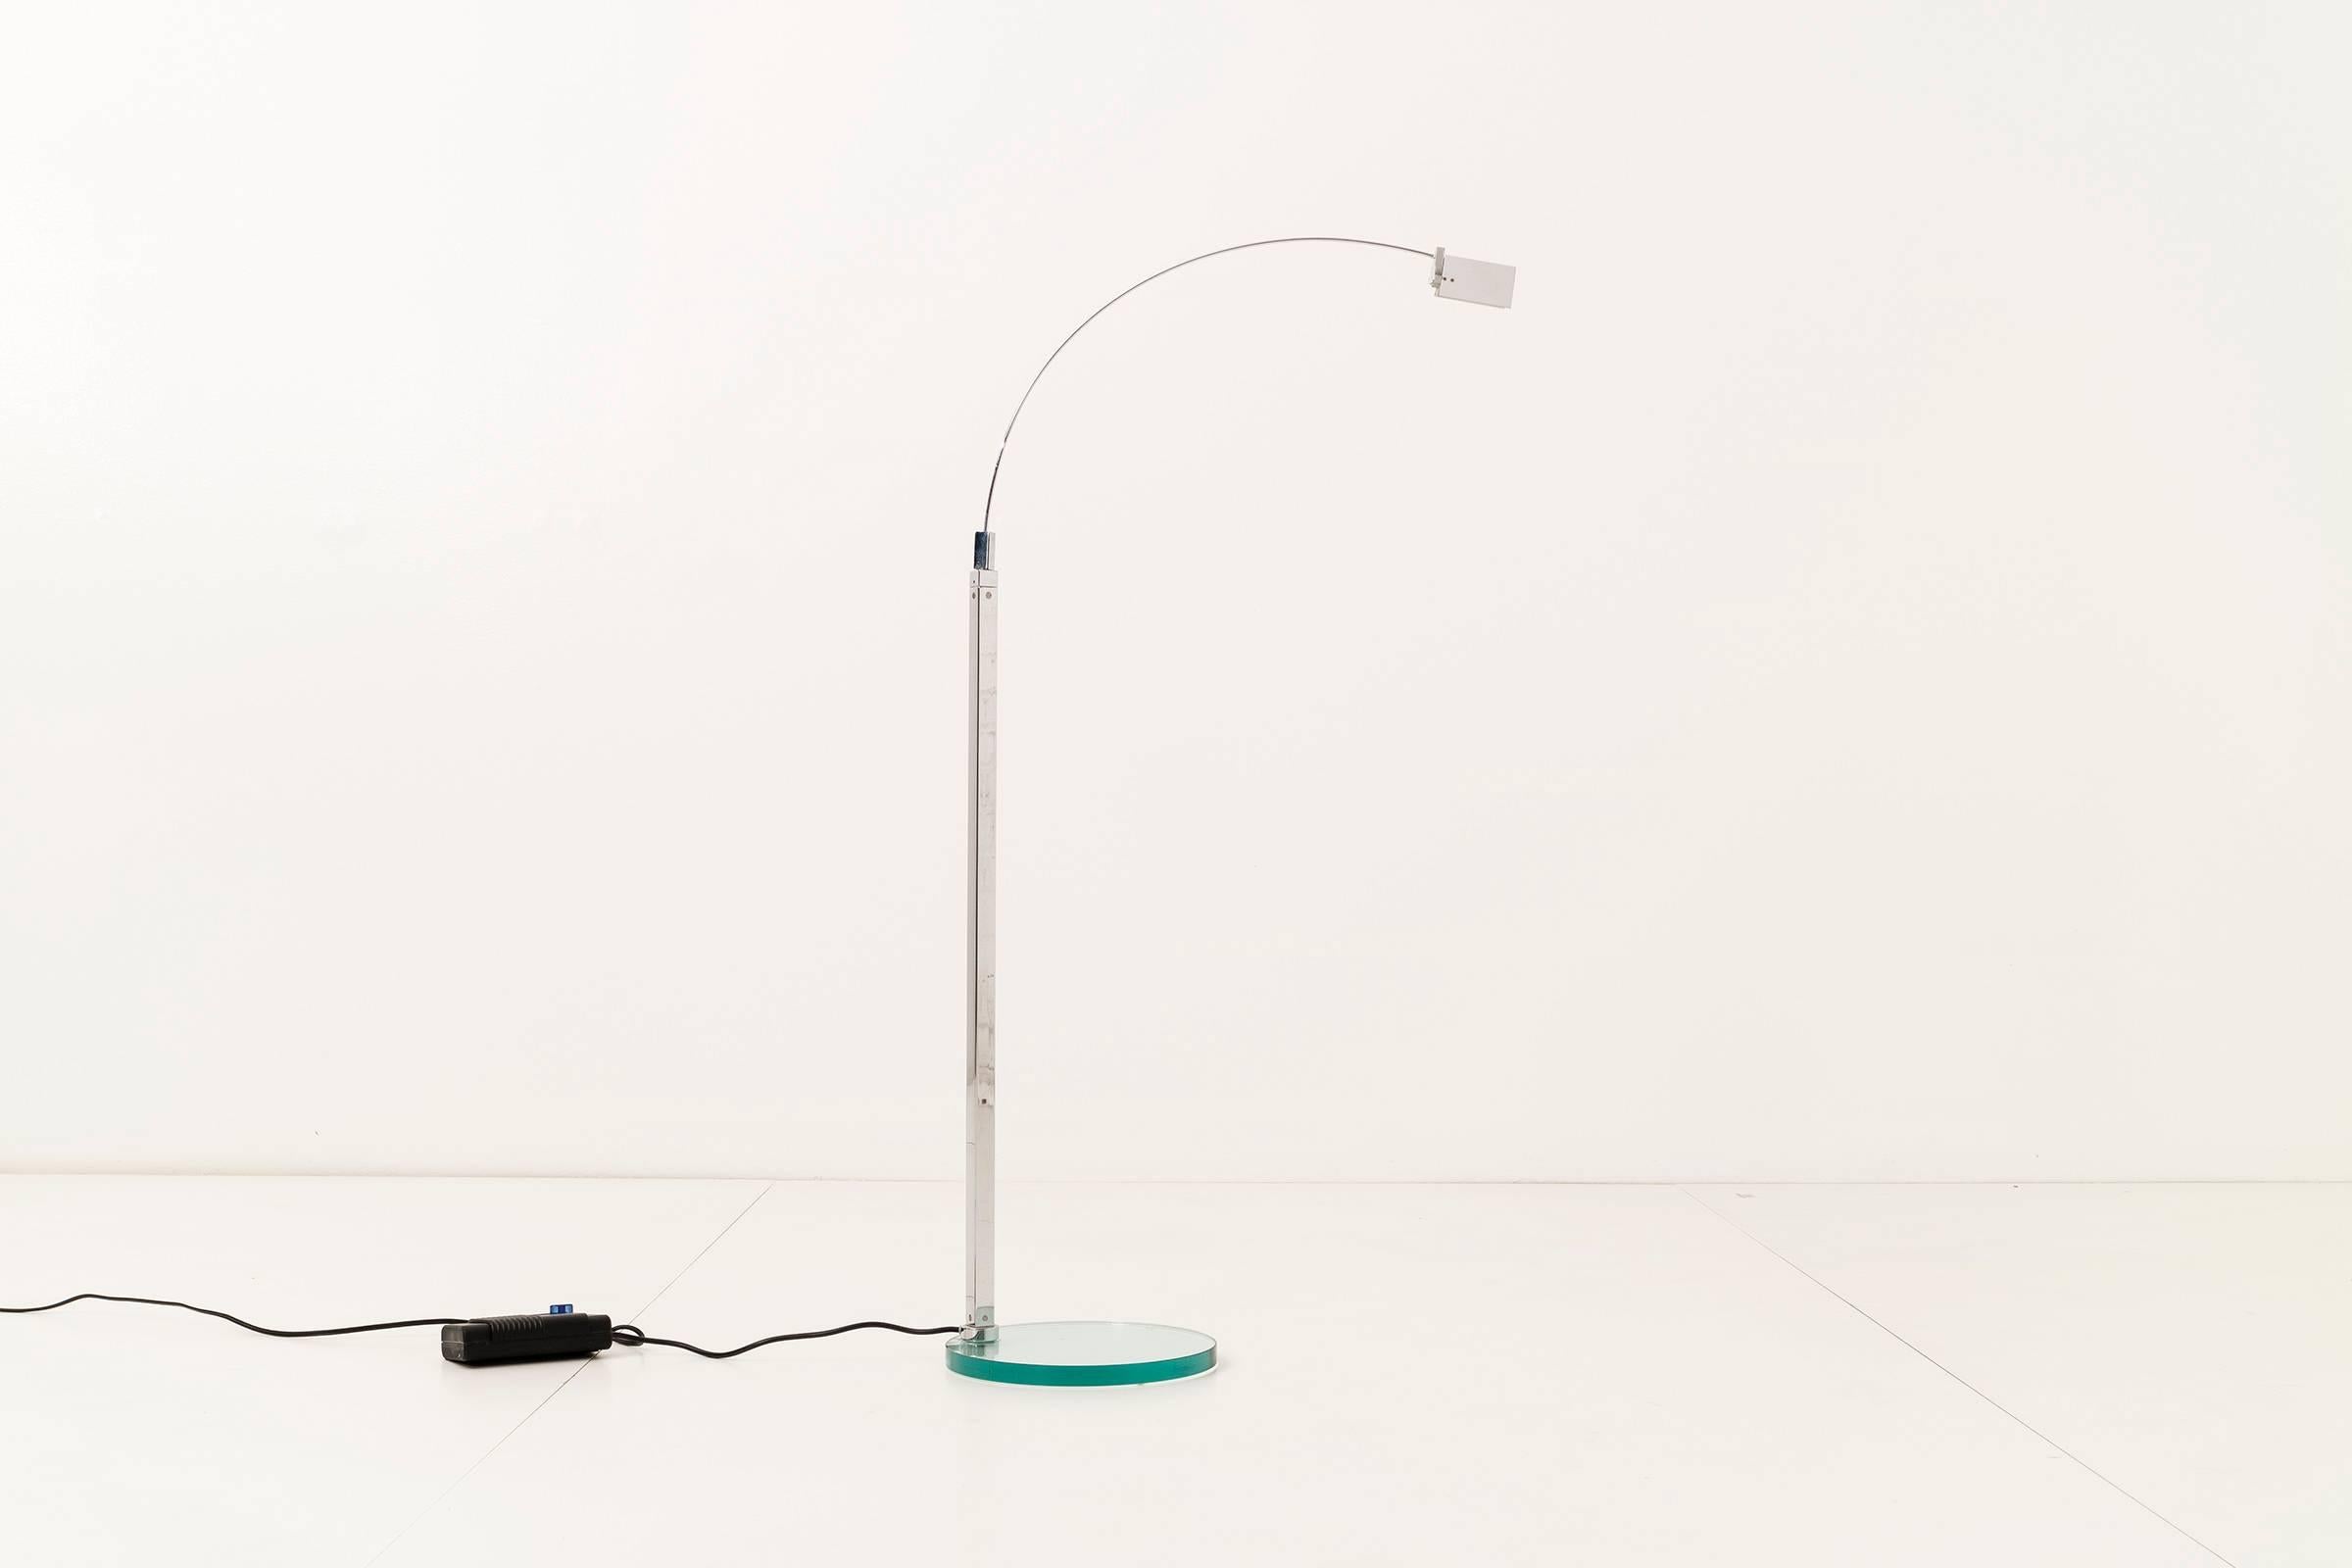 Alvaro Siza for Fontana Arte.
The Falena floor lamp features a aluminum swing arm mounded on a glass base.